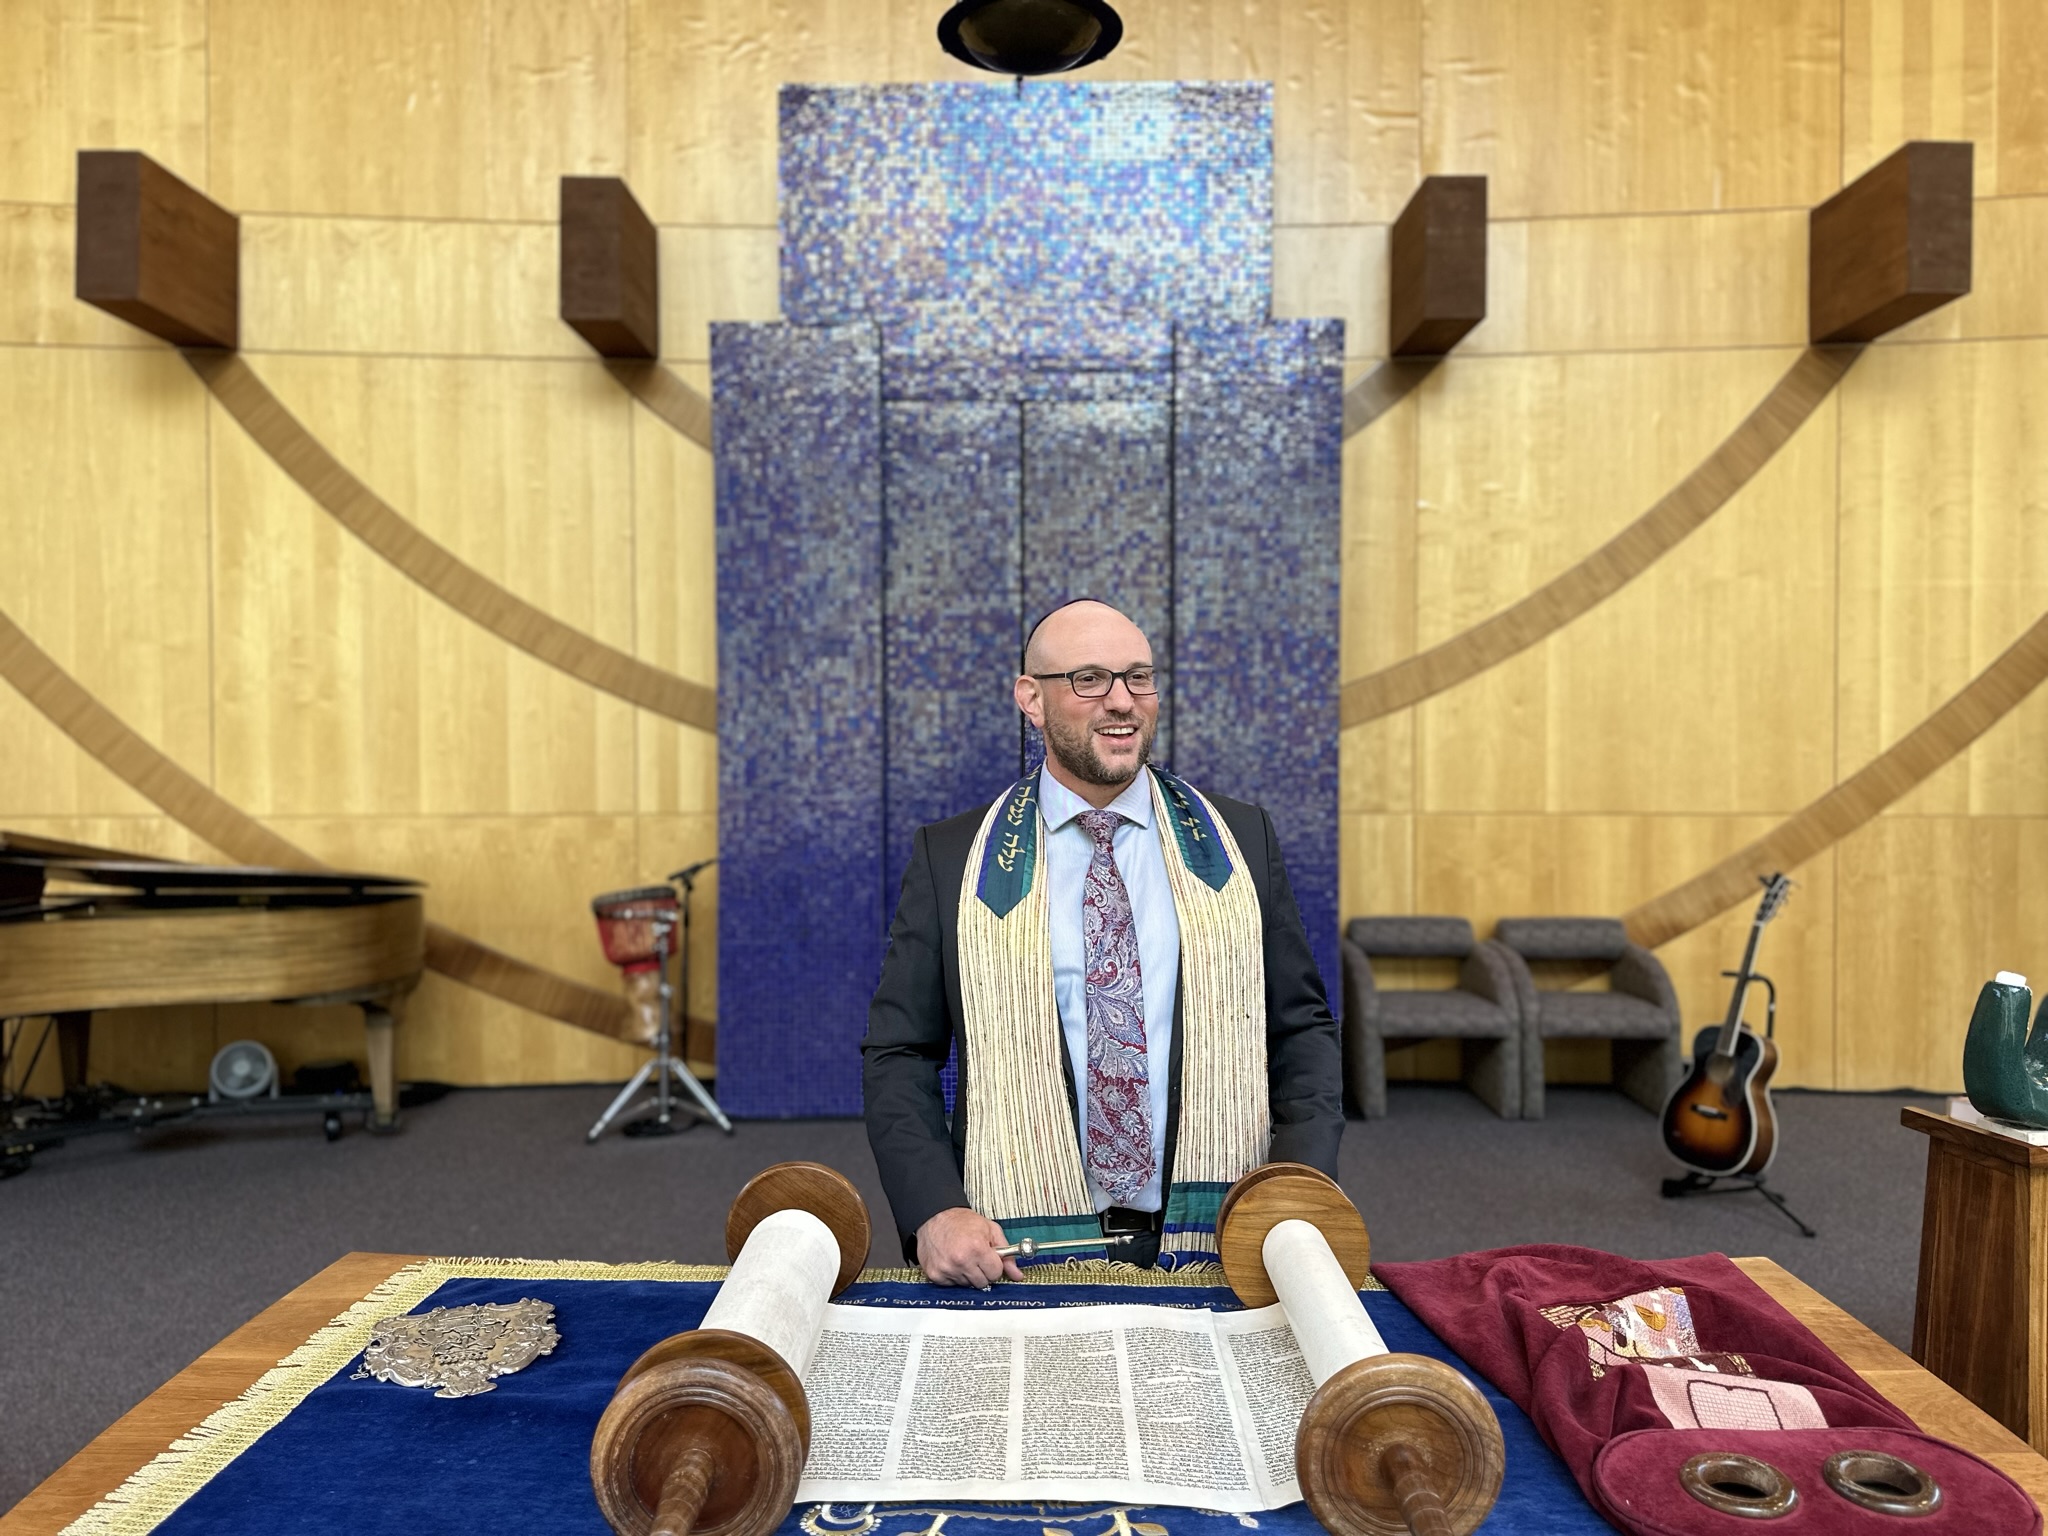 Transformational Giving in a Jewish Congregation